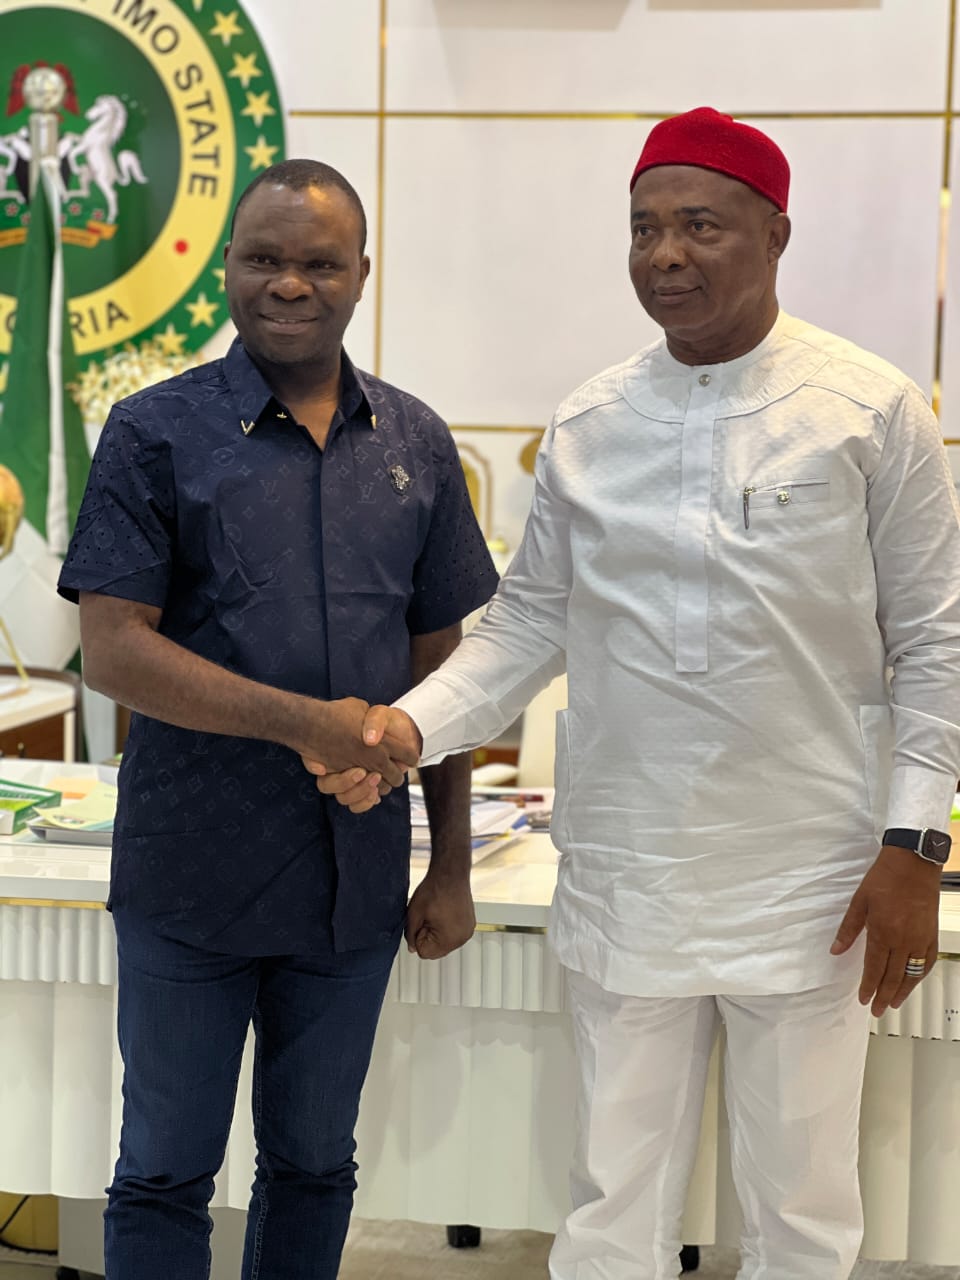 Imo 2023: Comrade Iyere to mobilize youths for Uzodinma